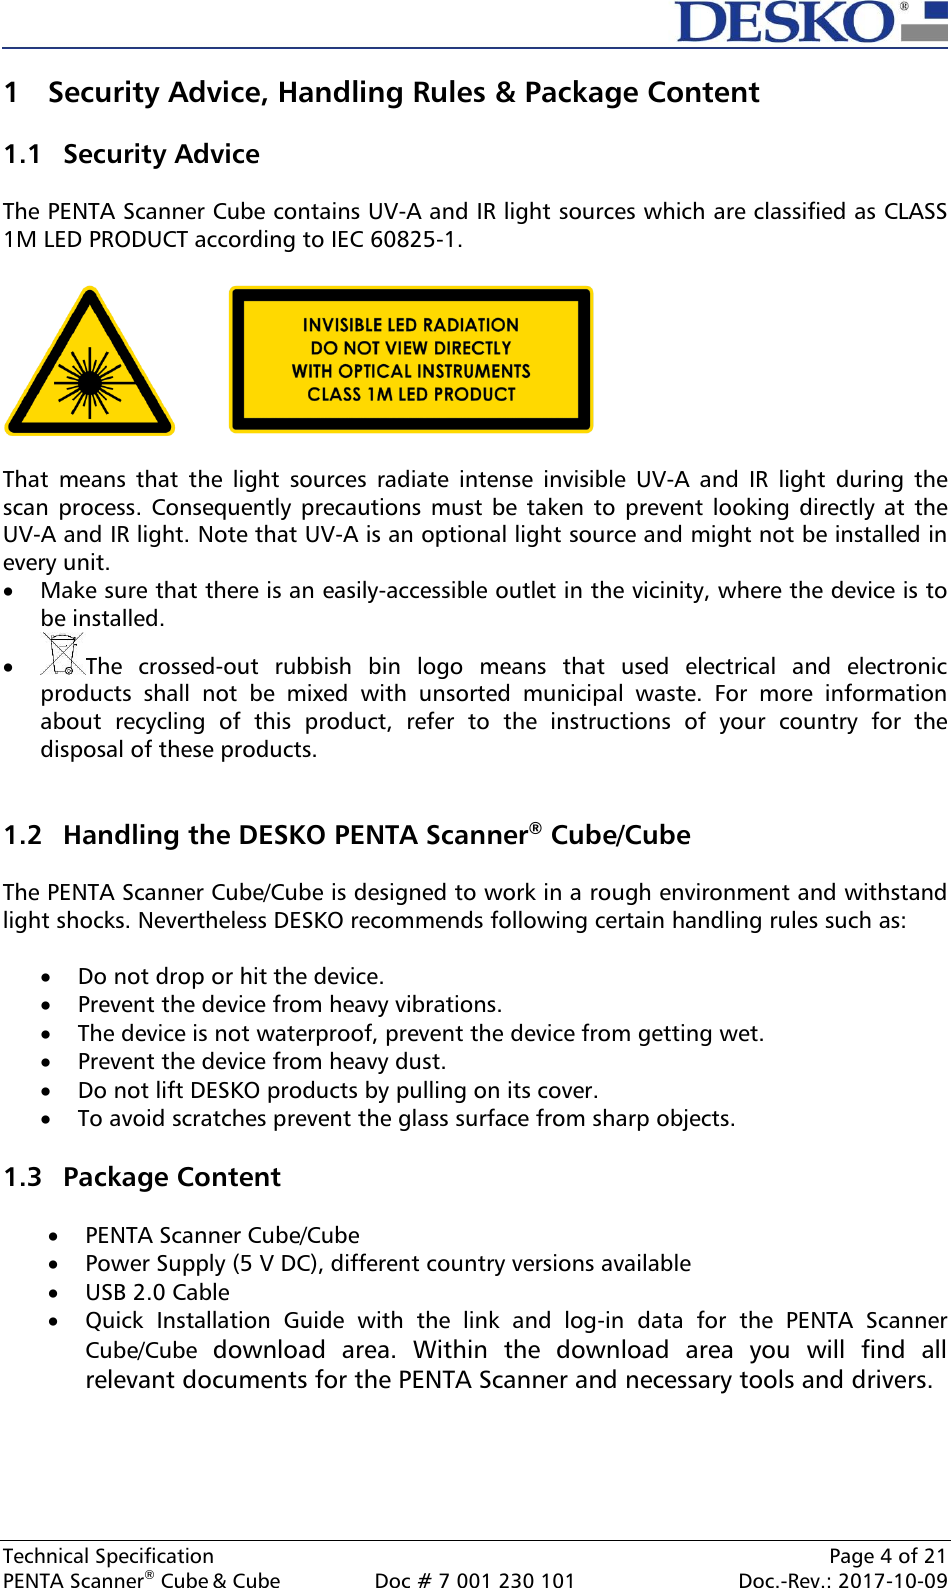  Technical Specification    Page 4 of 21 PENTA Scanner® Cube &amp; Cube  Doc # 7 001 230 101  Doc.-Rev.: 2017-10-09    1 Security Advice, Handling Rules &amp; Package Content  1.1 Security Advice  The PENTA Scanner Cube contains UV-A and IR light sources which are classified as CLASS 1M LED PRODUCT according to IEC 60825-1.      That  means  that  the  light  sources  radiate  intense  invisible  UV-A  and  IR  light  during  the scan process.  Consequently precautions must  be taken  to prevent  looking directly at  the UV-A and IR light. Note that UV-A is an optional light source and might not be installed in every unit.   Make sure that there is an easily-accessible outlet in the vicinity, where the device is to be installed.  The  crossed-out  rubbish  bin  logo  means  that  used  electrical  and  electronic products  shall  not  be  mixed  with  unsorted  municipal  waste.  For  more  information about  recycling  of  this  product,  refer  to  the  instructions  of  your  country  for  the disposal of these products.   1.2 Handling the DESKO PENTA Scanner® Cube/Cube  The PENTA Scanner Cube/Cube is designed to work in a rough environment and withstand light shocks. Nevertheless DESKO recommends following certain handling rules such as:   Do not drop or hit the device.  Prevent the device from heavy vibrations.  The device is not waterproof, prevent the device from getting wet.  Prevent the device from heavy dust.  Do not lift DESKO products by pulling on its cover.  To avoid scratches prevent the glass surface from sharp objects.  1.3 Package Content   PENTA Scanner Cube/Cube   Power Supply (5 V DC), different country versions available  USB 2.0 Cable  Quick  Installation  Guide  with  the  link  and  log-in  data  for  the  PENTA  Scanner Cube/Cube  download  area.  Within  the  download  area  you  will  find  all relevant documents for the PENTA Scanner and necessary tools and drivers.    